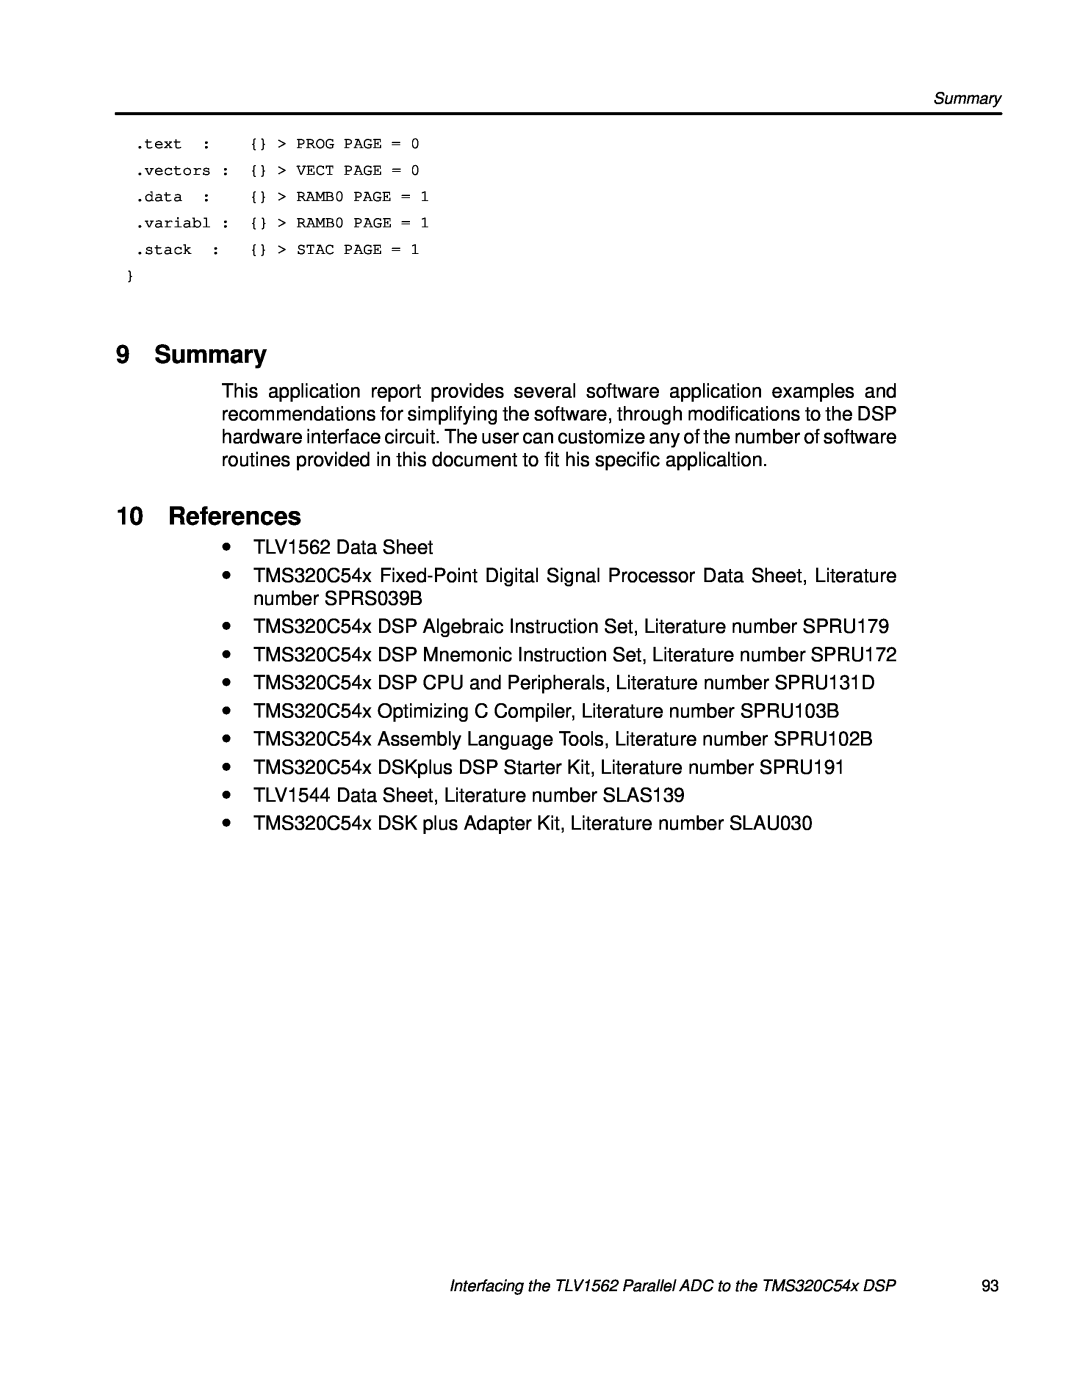 Texas Instruments TLV1562 manual Summary, References 